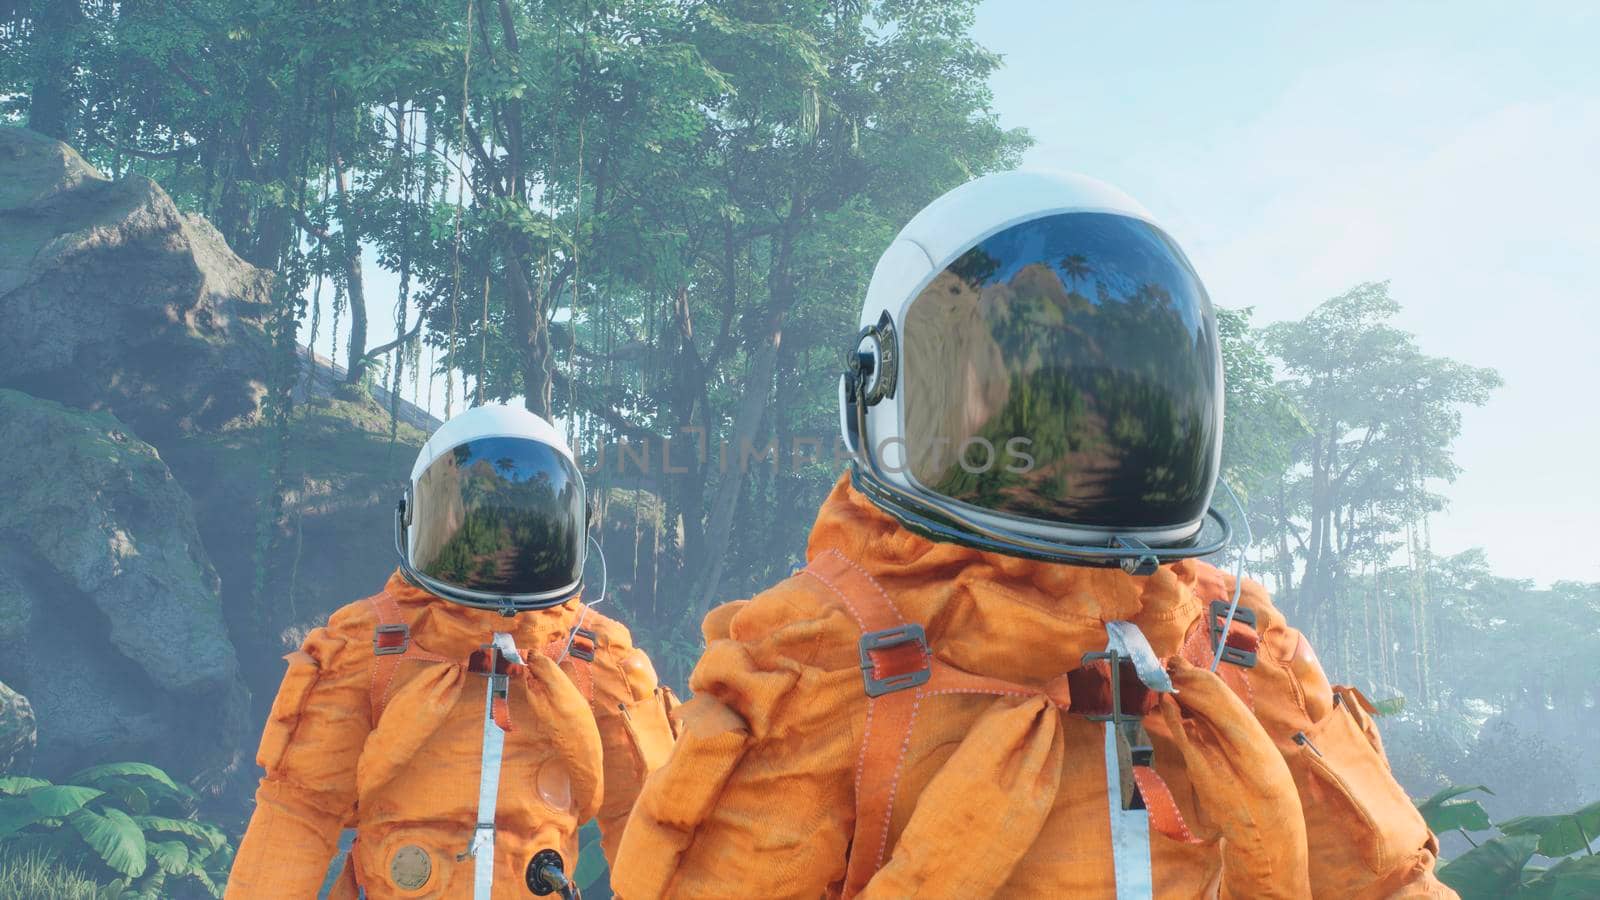 Research astronauts landed on an alien green planet.